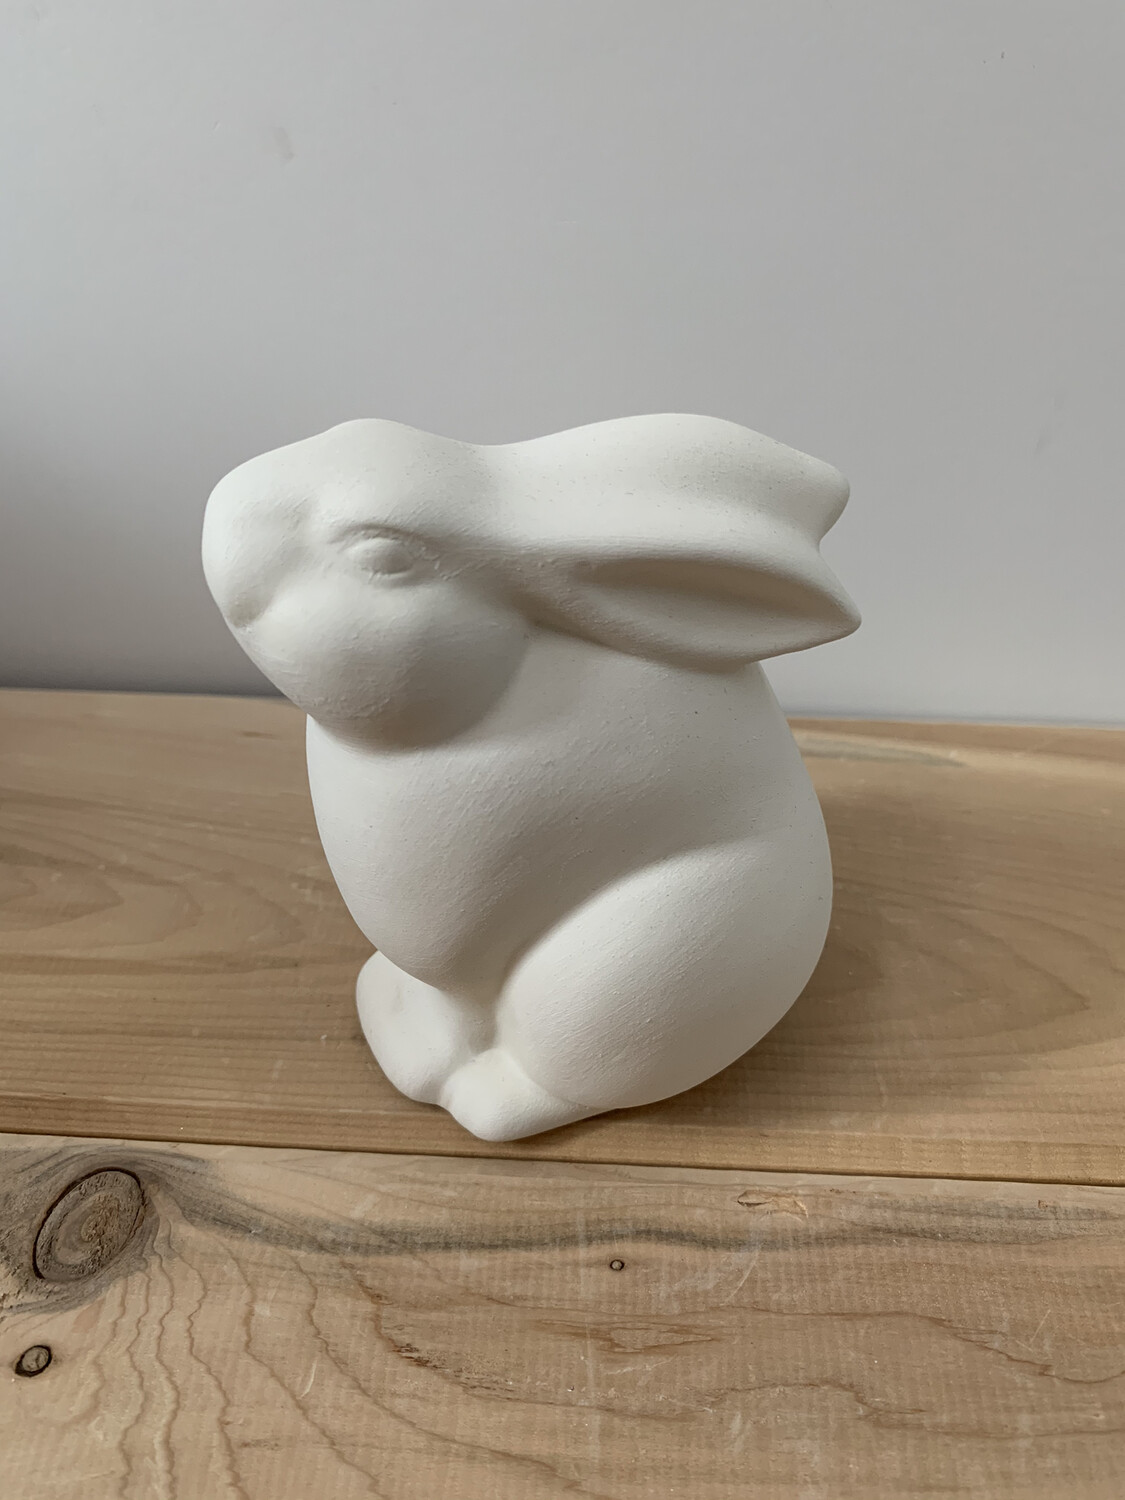 Paint Your Own Pottery - Ceramic
Bunny Rabbit Painting Kit